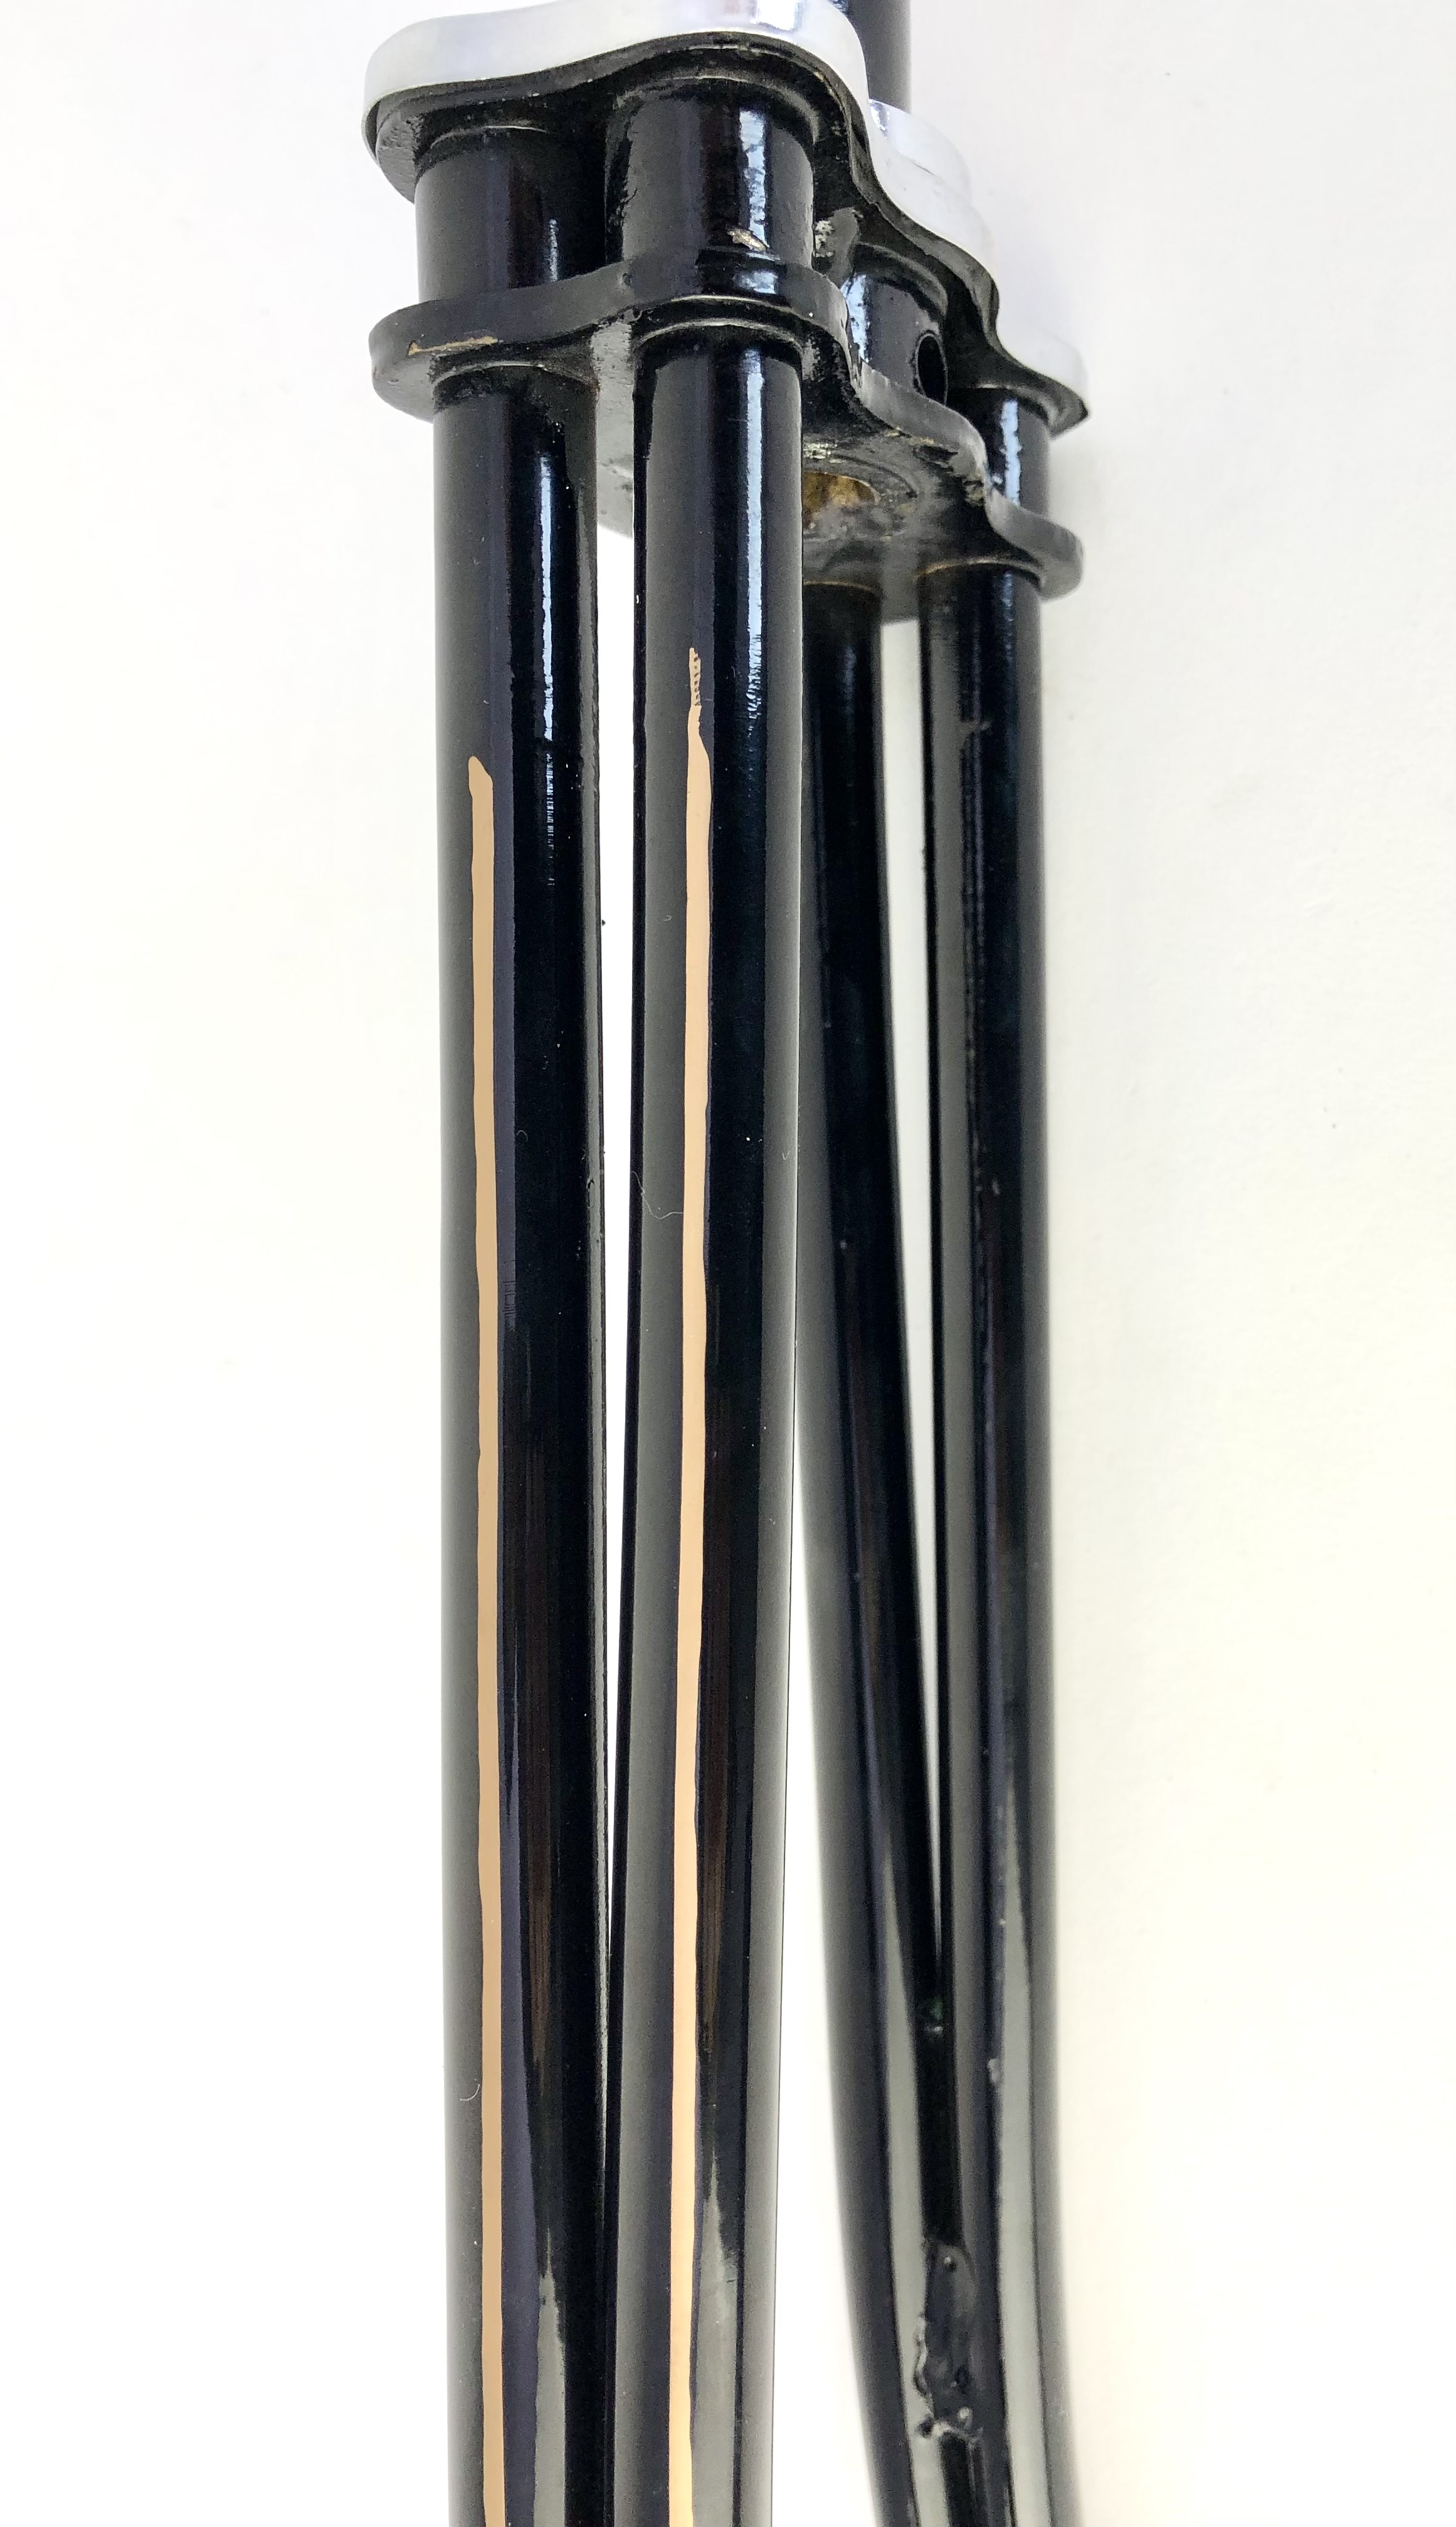 Fourche double tube - style Humber